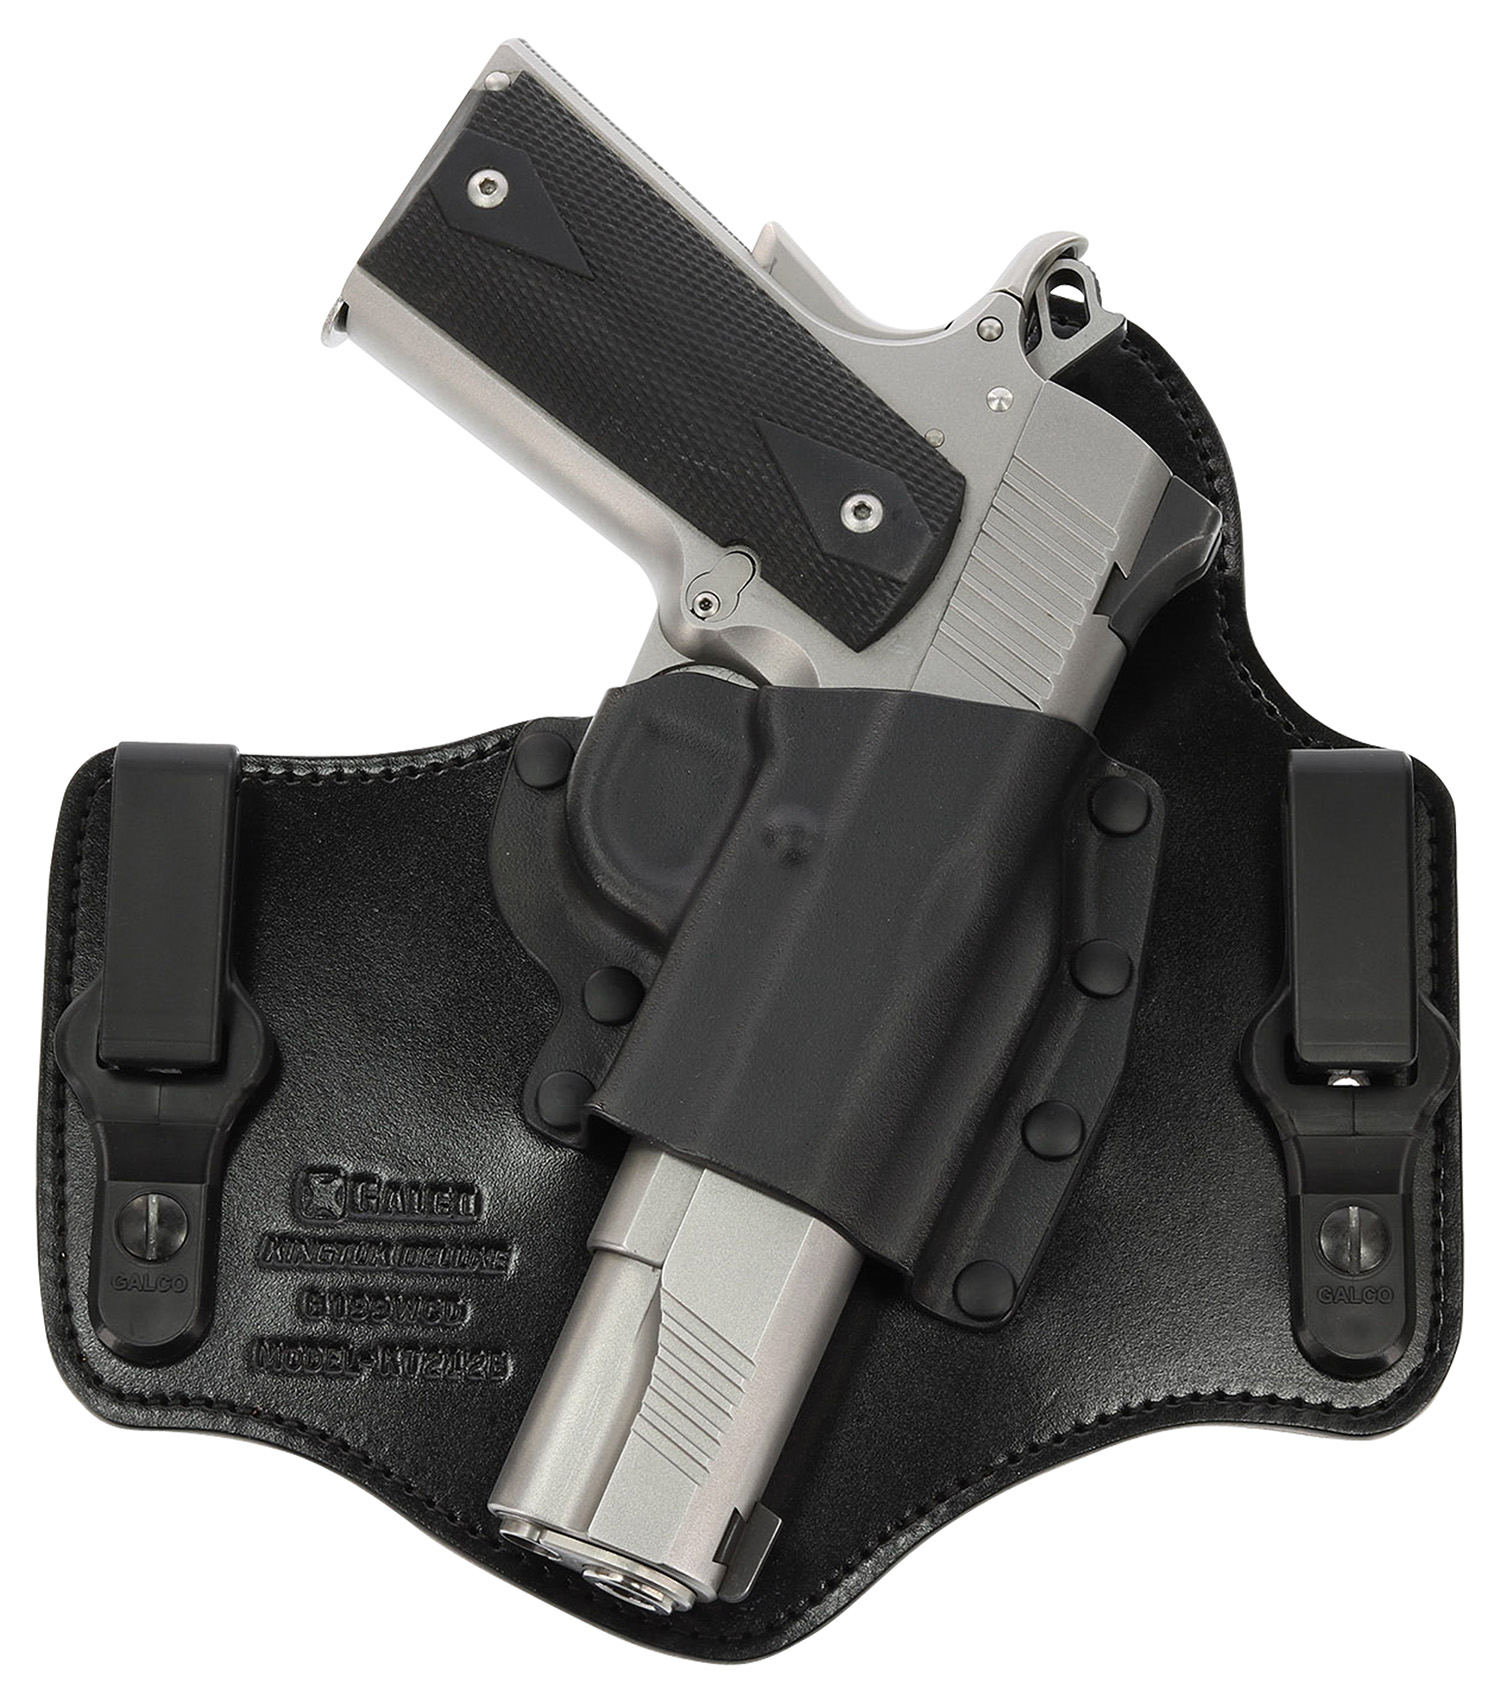 Galco KT800B KingTuk Deluxe Black Kydex Holster w/Leather Backing IWB fits Glock 43 Right Hand